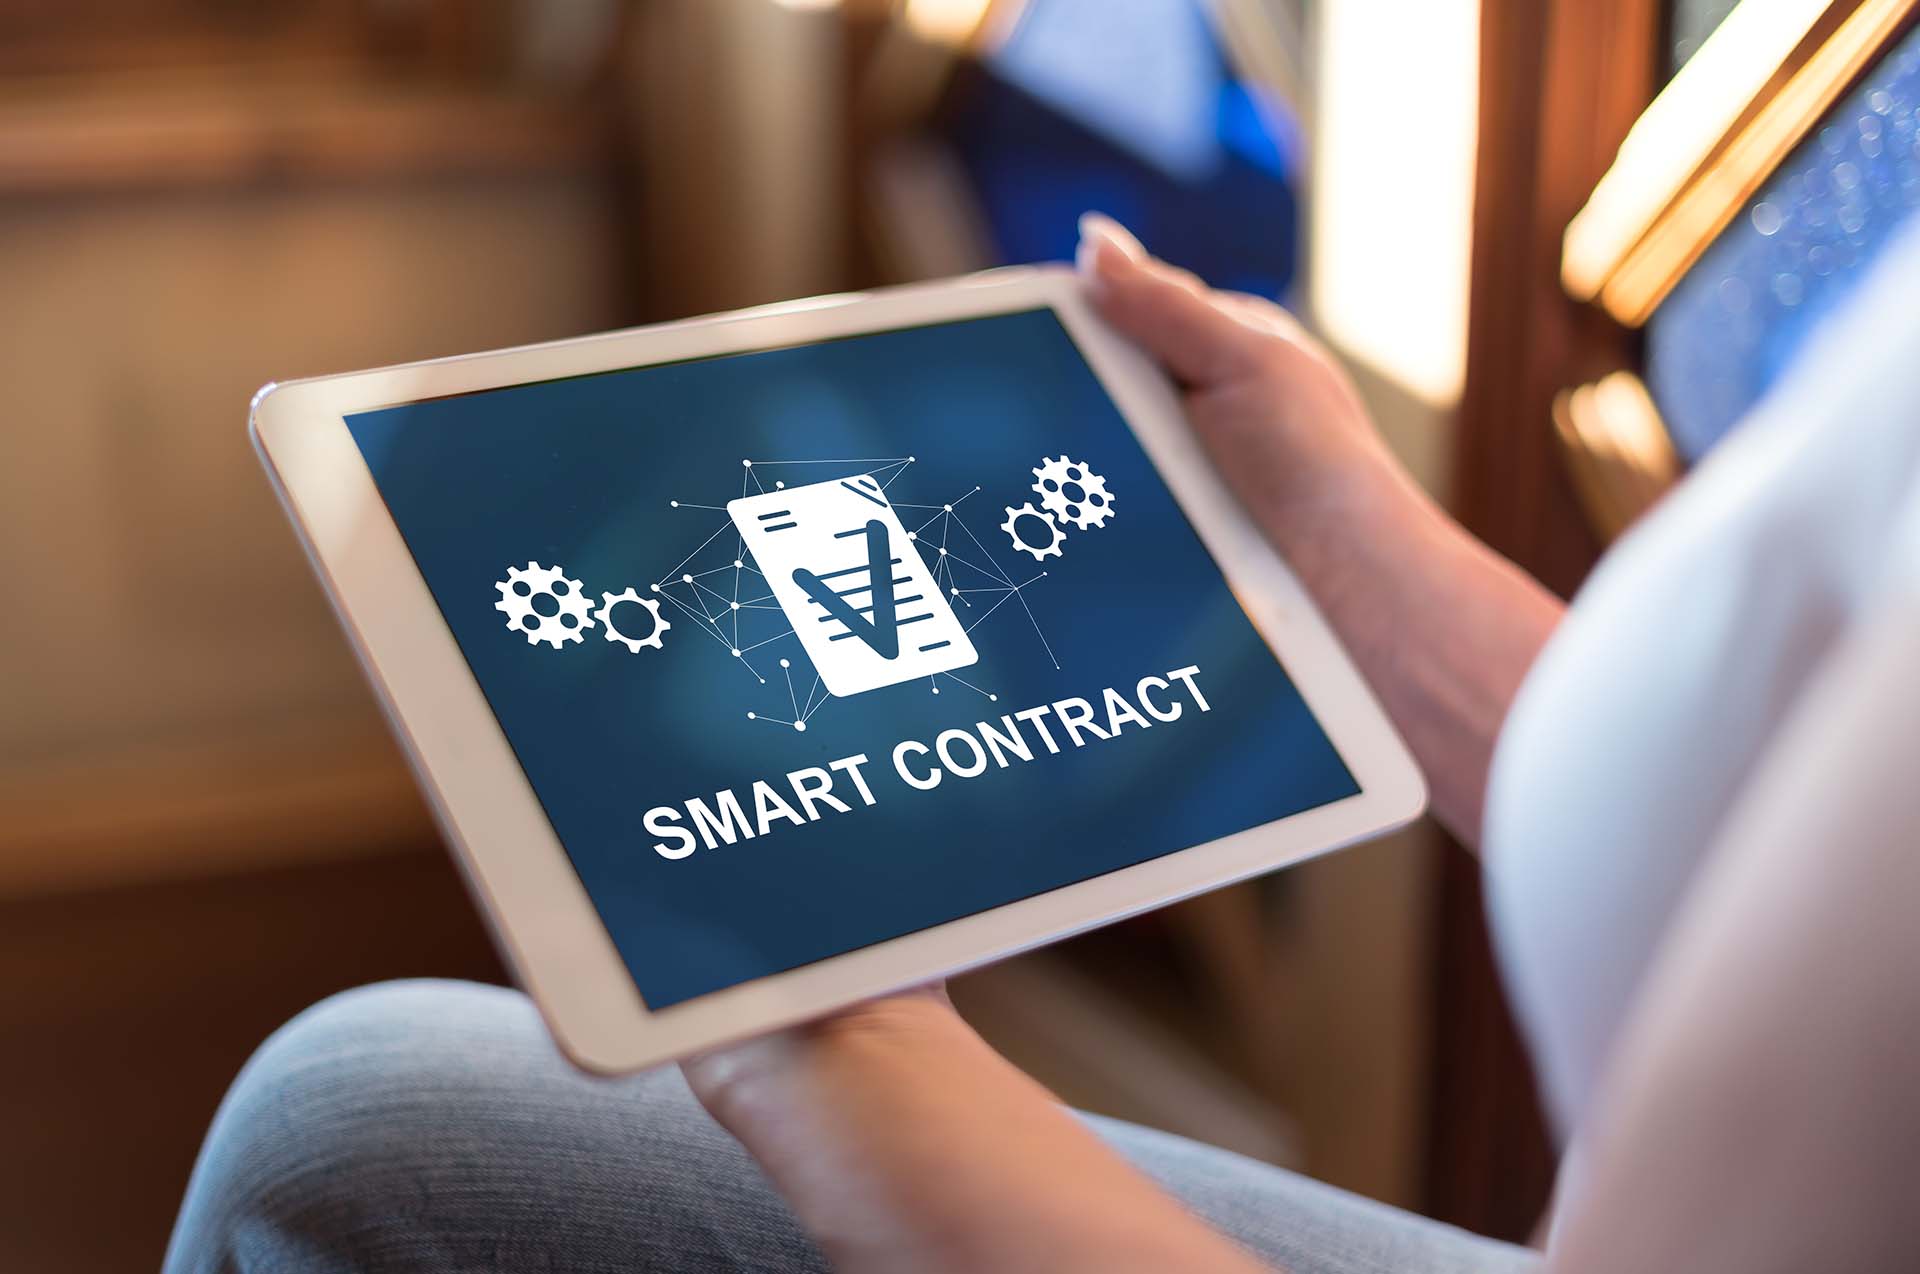 What Are Smart Contracts In The Supply Chain For Chemicals